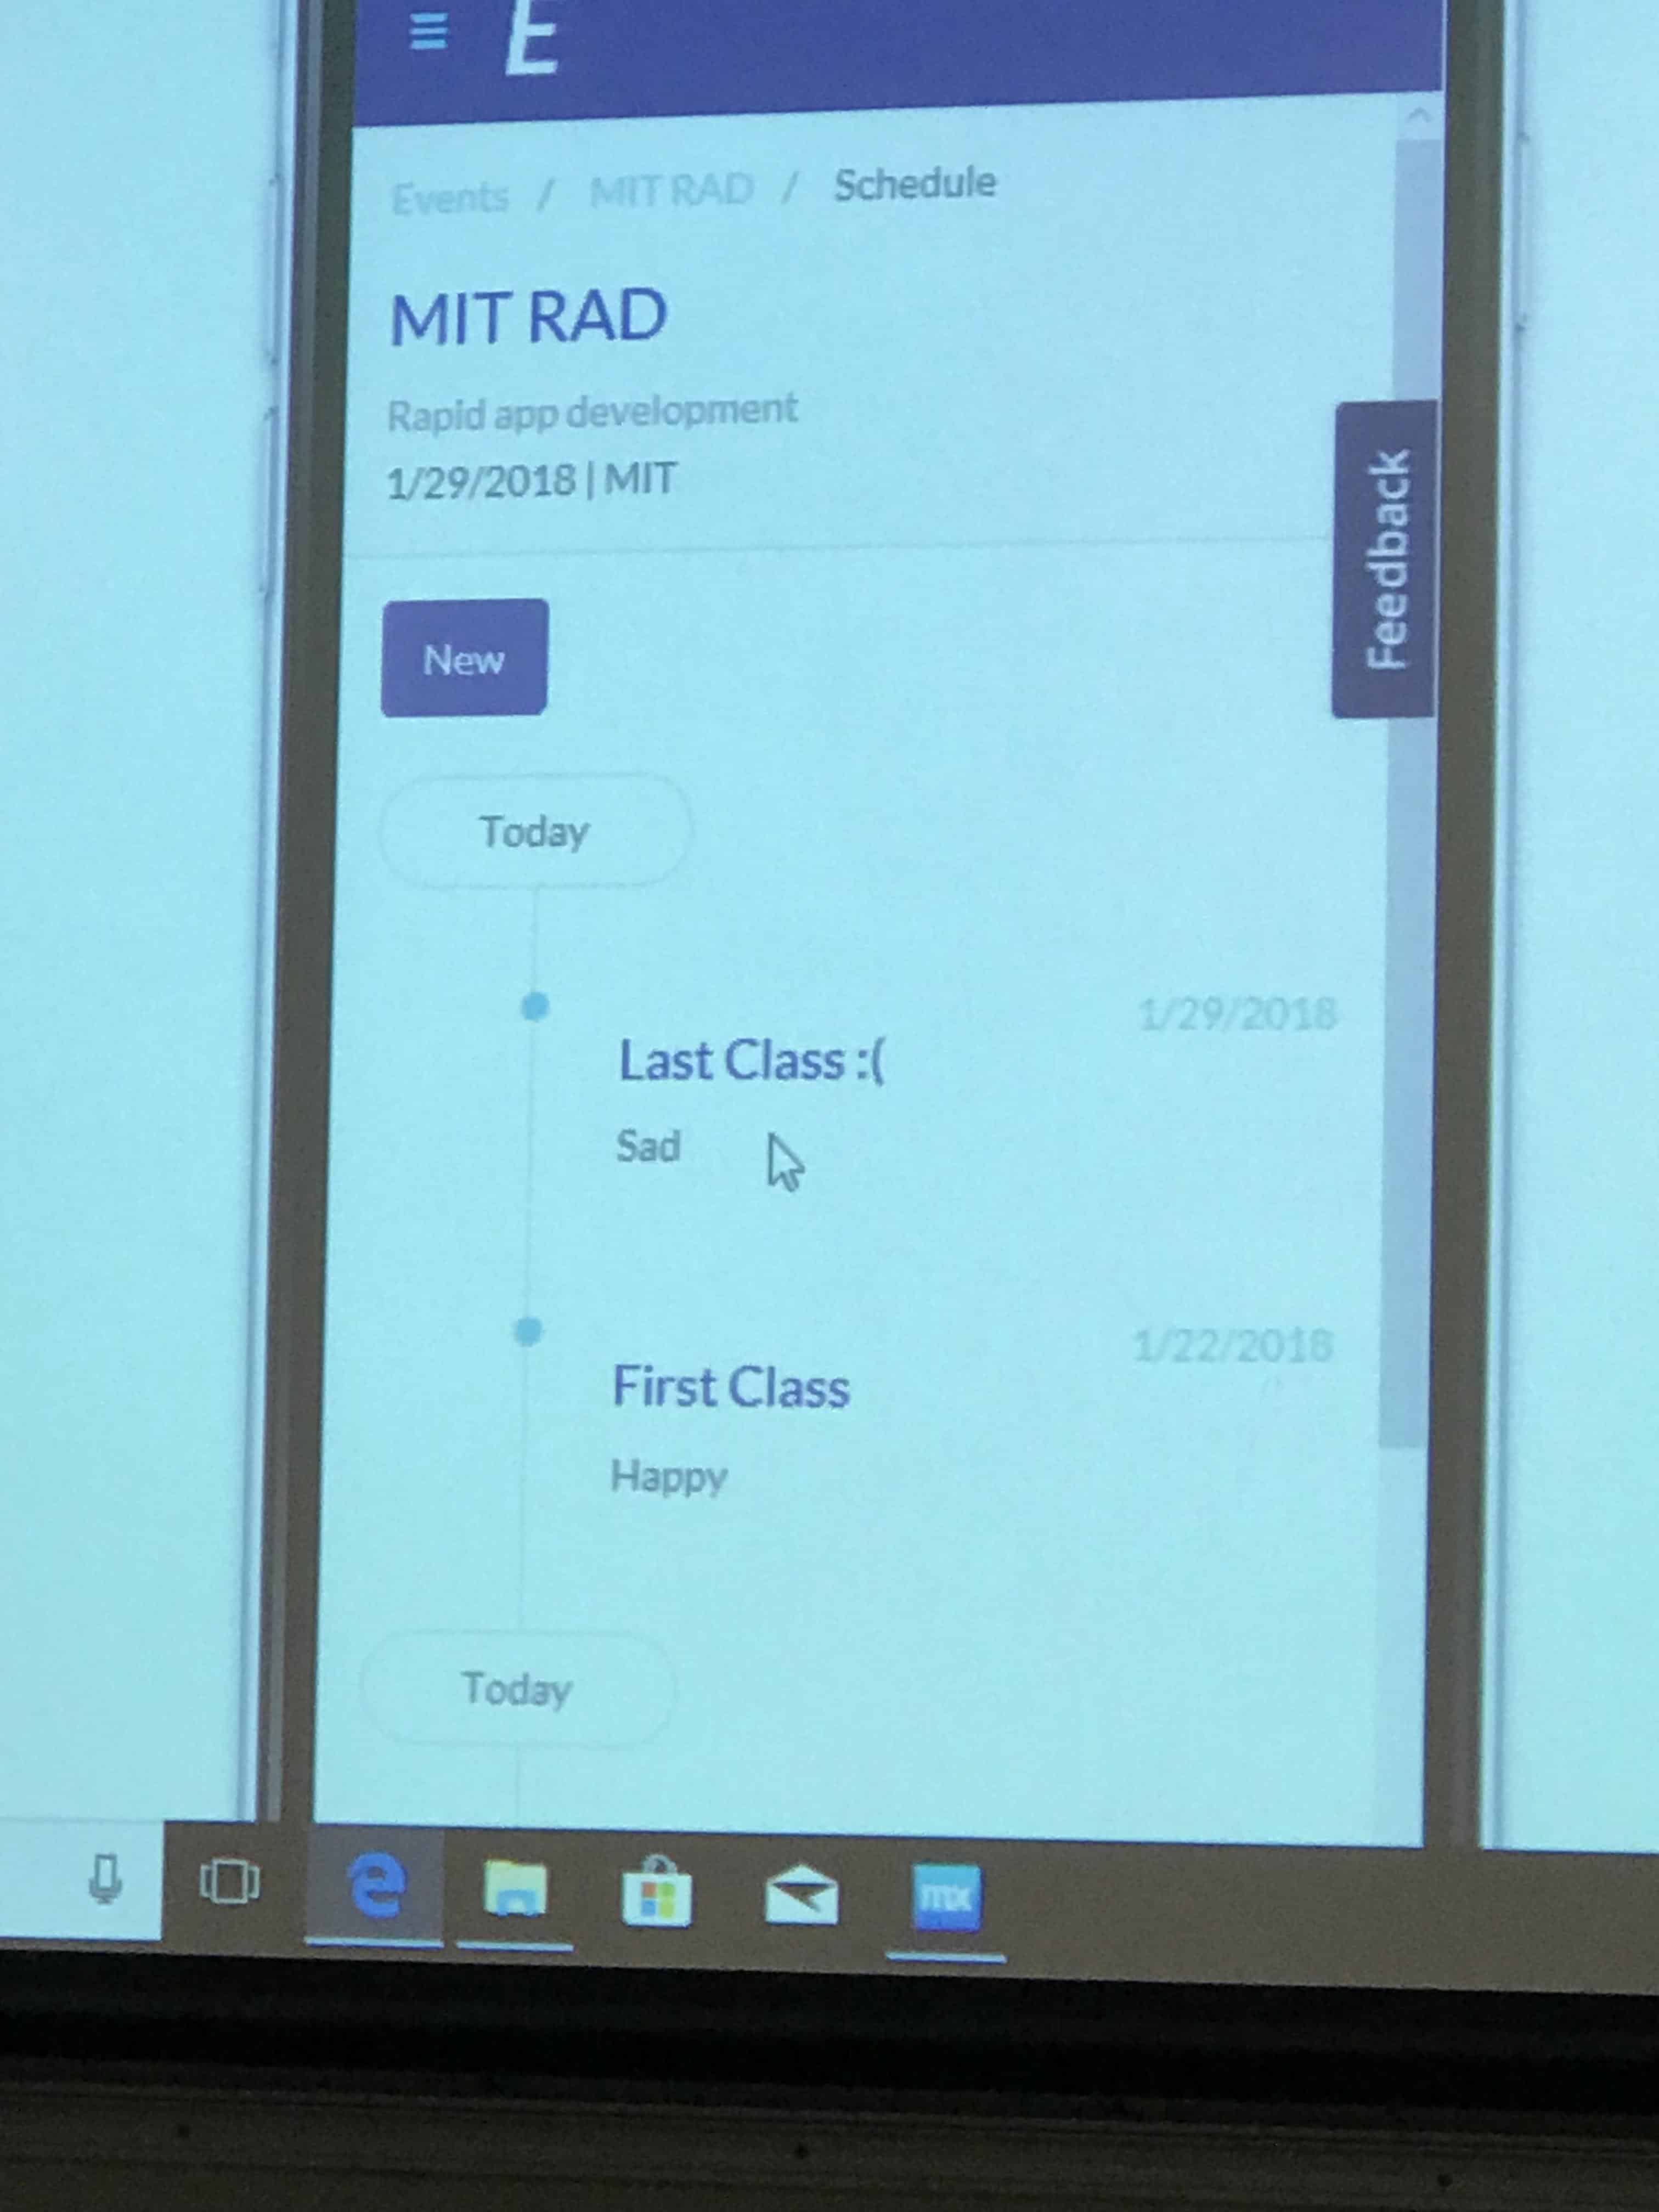 class-scheduling app built with low-code development by MIT students